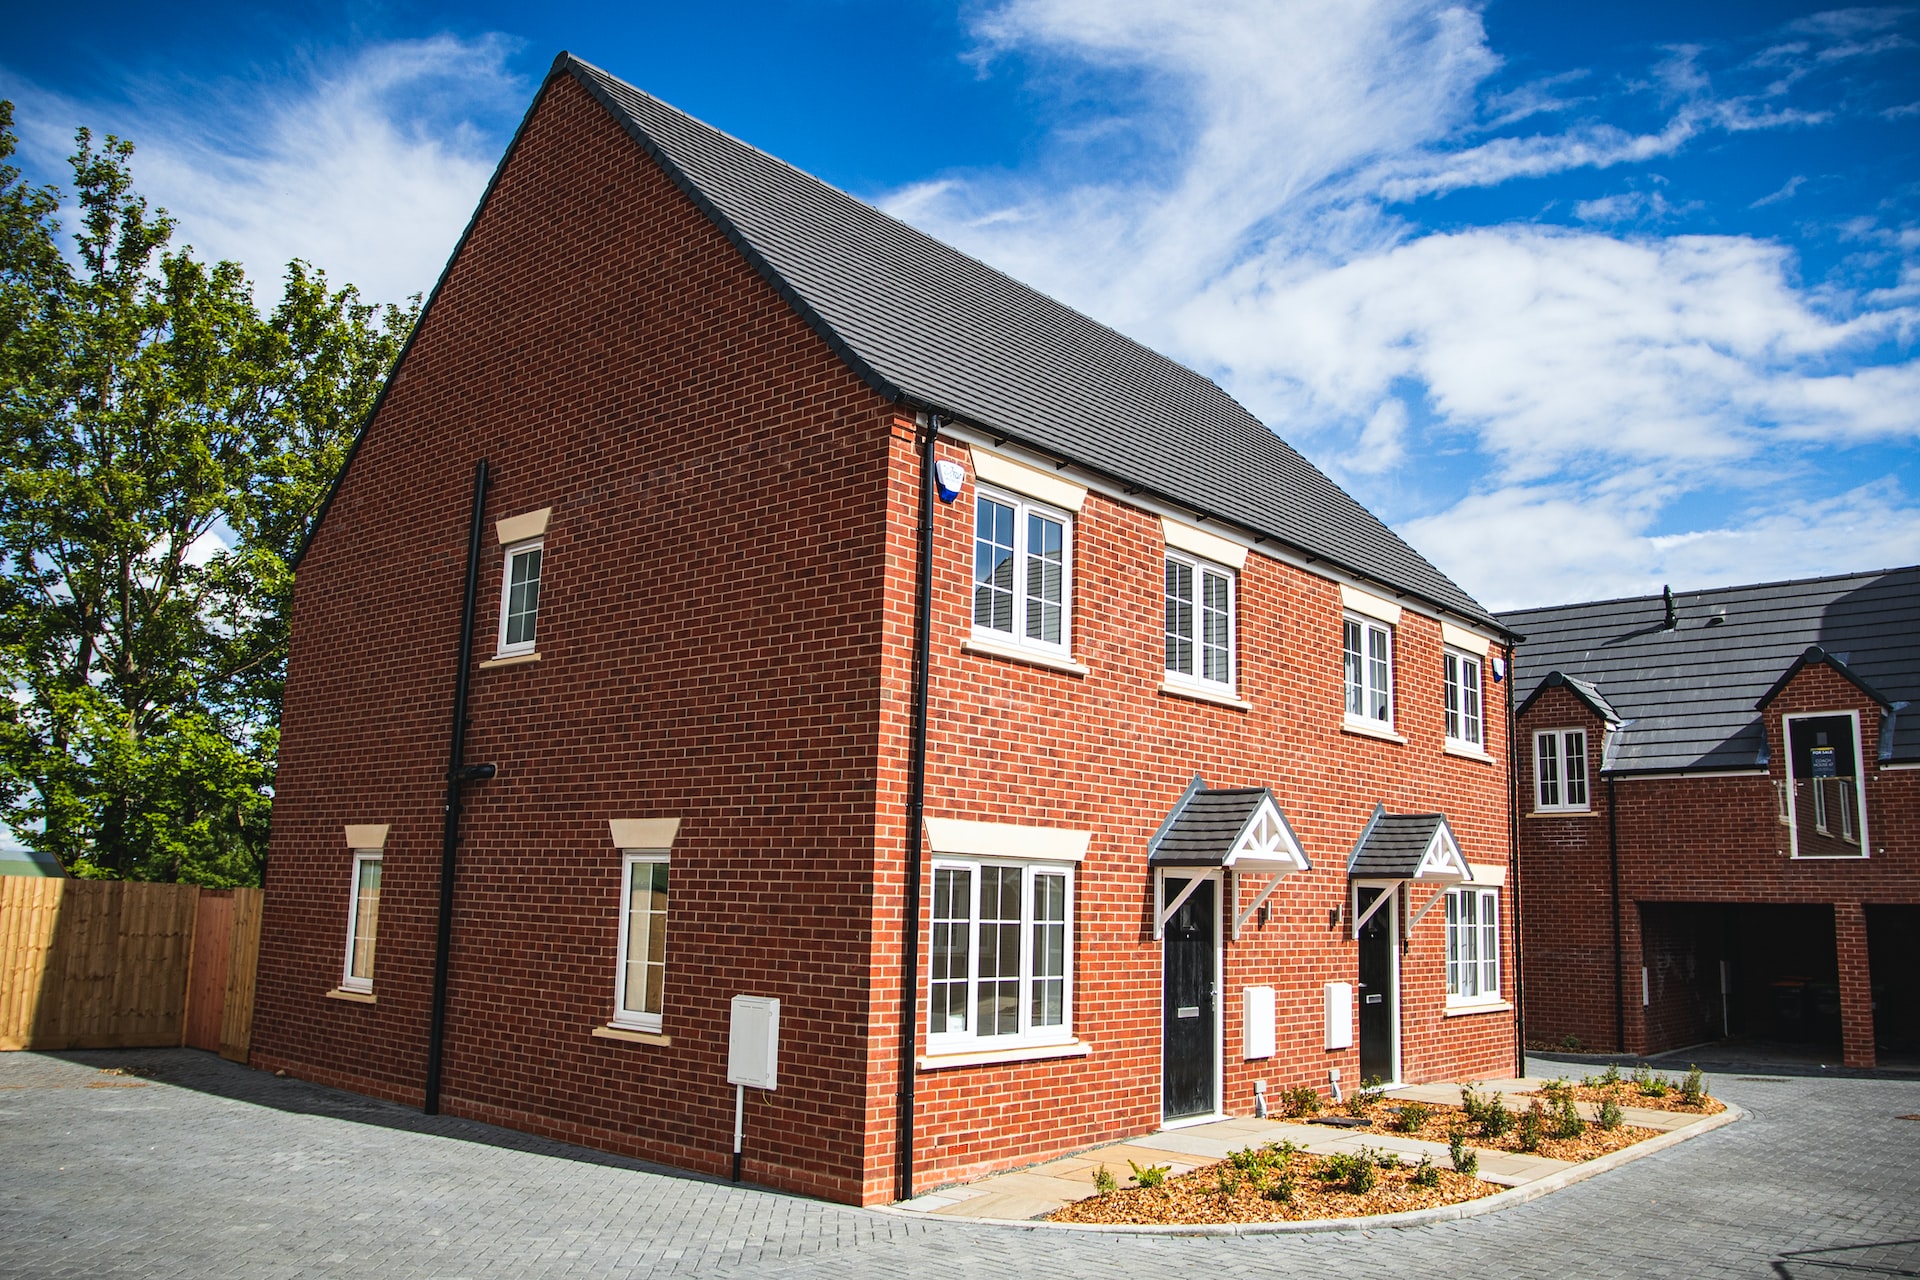 Can speculative housebuilders solve the UK’s housing crisis?